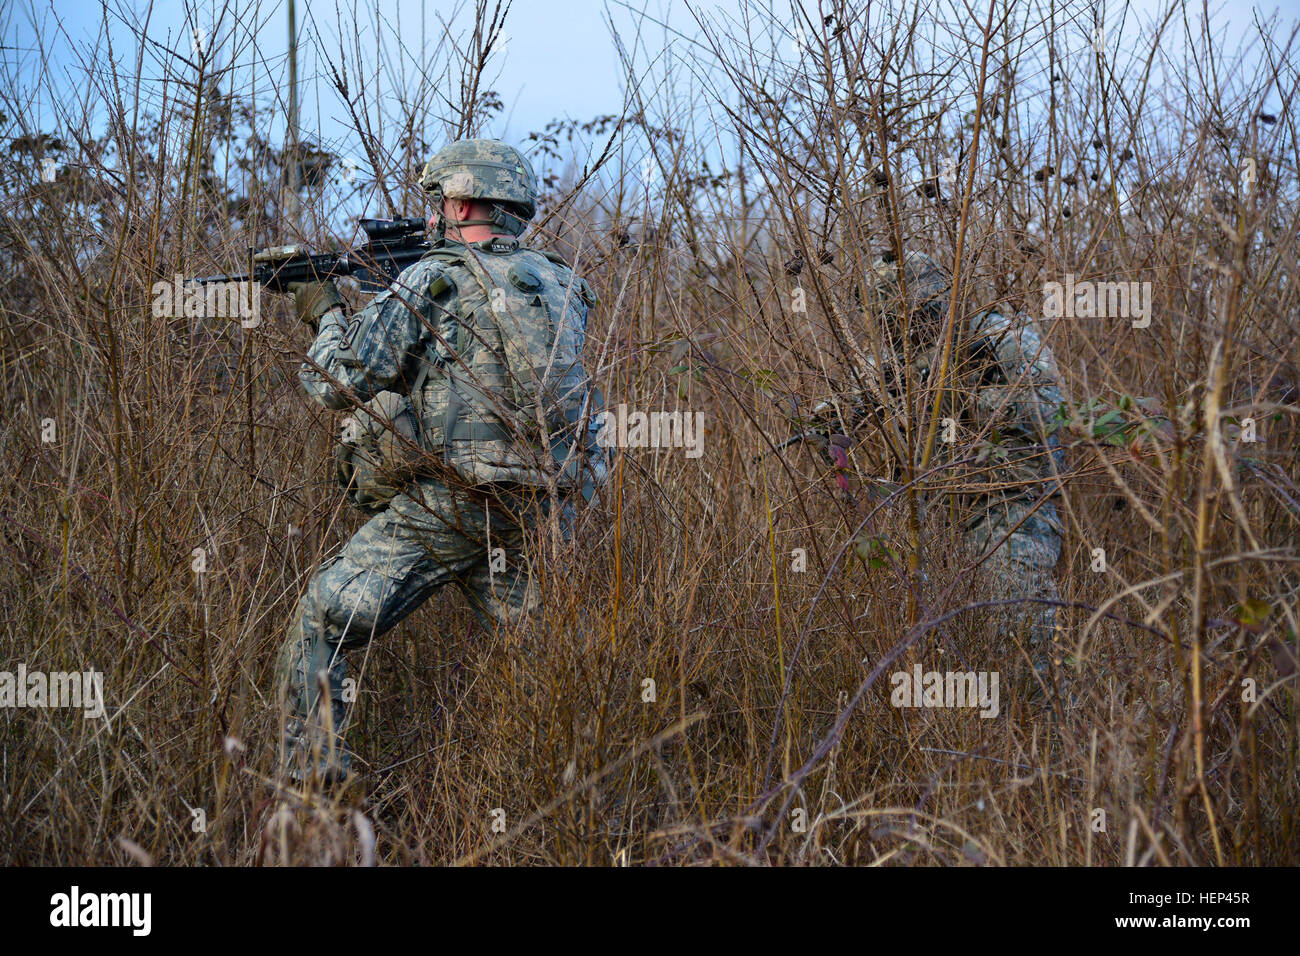 U.S. Army paratroopers from Company C, 1st Battalion, 503rd Infantry Regiment, 173rd Airborne Brigade, move through vegetation Feb. 4, 2015, during training at Longare Complex, Vicenza, Italy. The 173rd Airborne is the Army’s Contingency Response Force in Europe, capable of rapidly projecting forces in Europe, Africa and the Middle East. (U.S. Army image by Visual Information Specialist Paolo Bovo/Released) 173rd Airborne Brigade day and night patrolling at Longare Complex 150204-A-JM436-124 Stock Photo